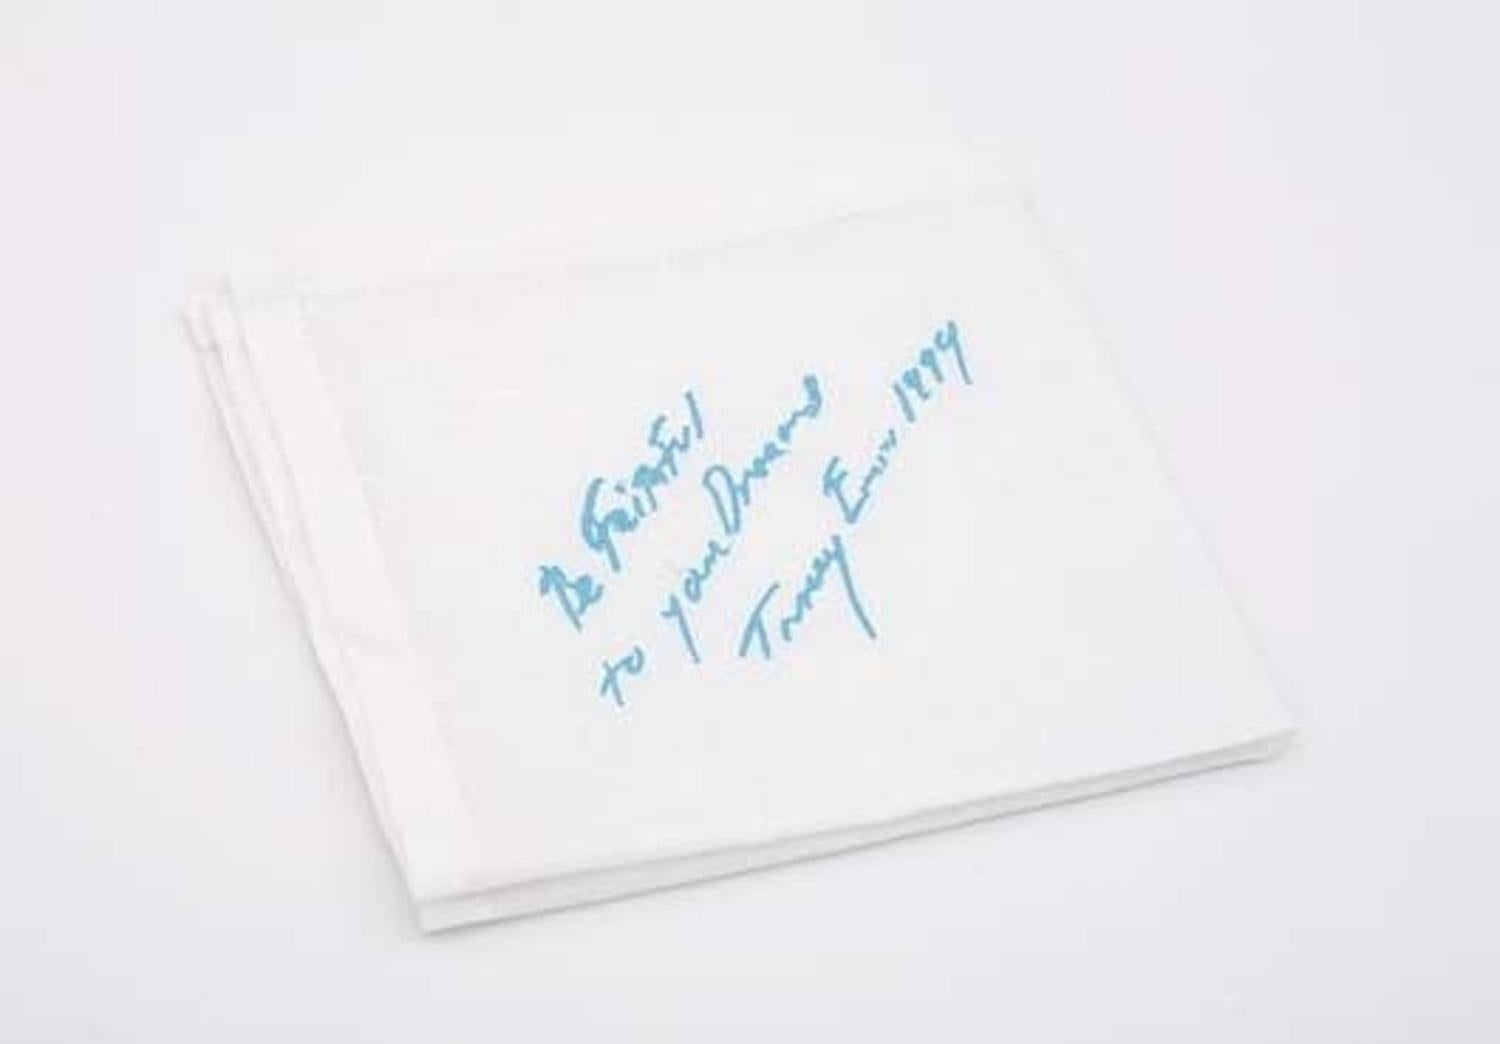 Be Faithful To Your Dreams (Limited Edition Embroidered Cotton Handkerchief) - Contemporary Mixed Media Art by Tracey Emin